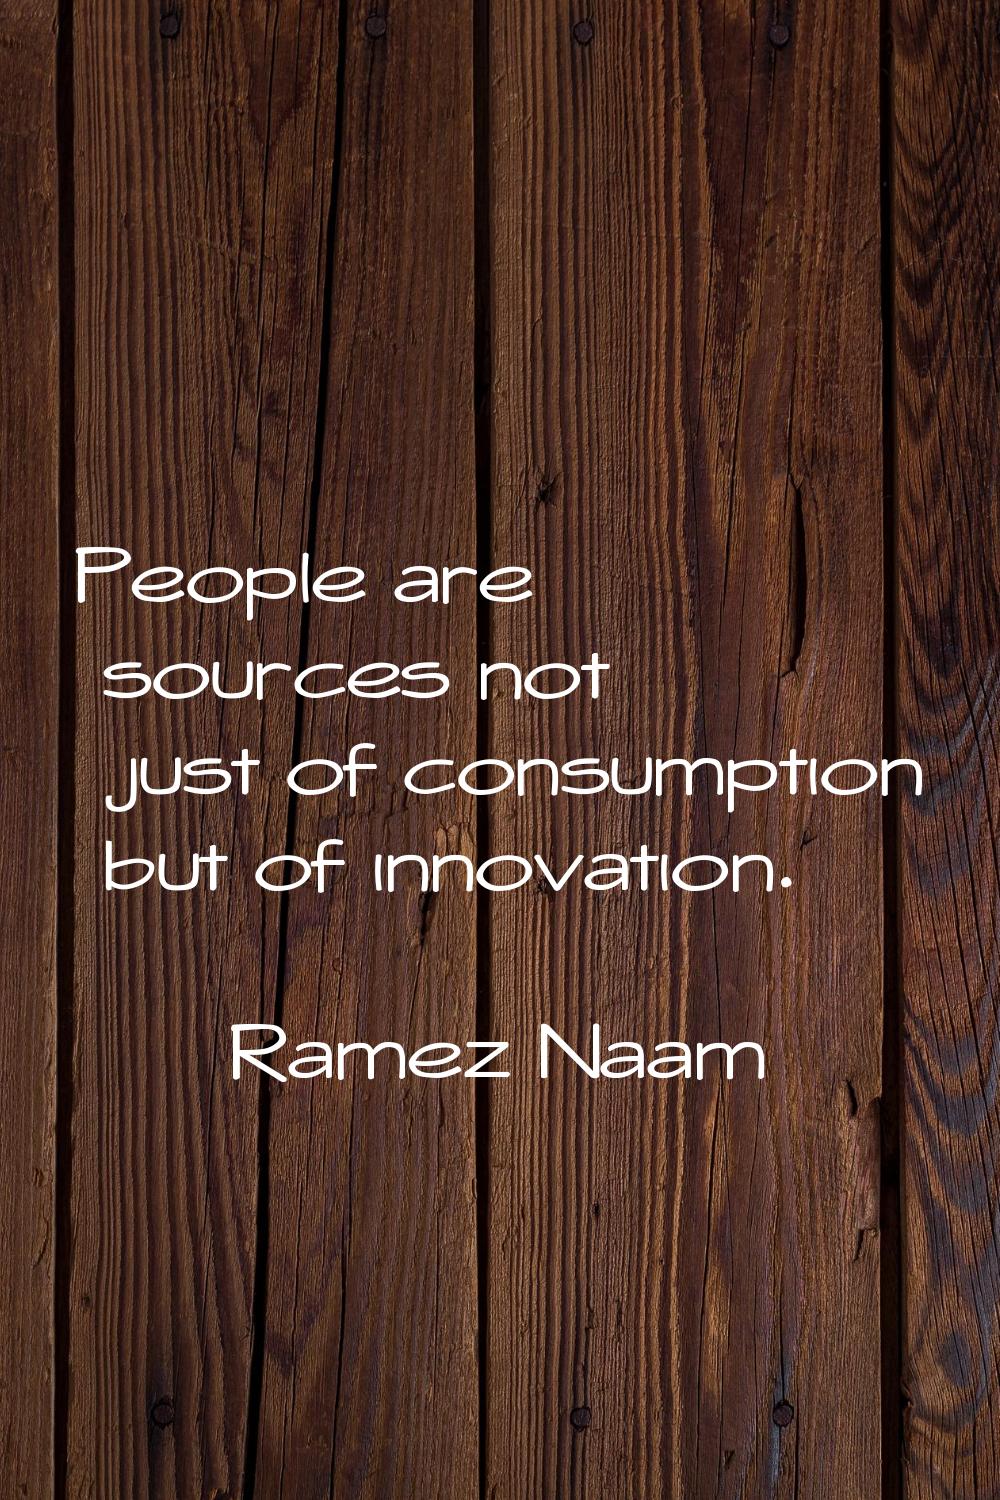 People are sources not just of consumption but of innovation.